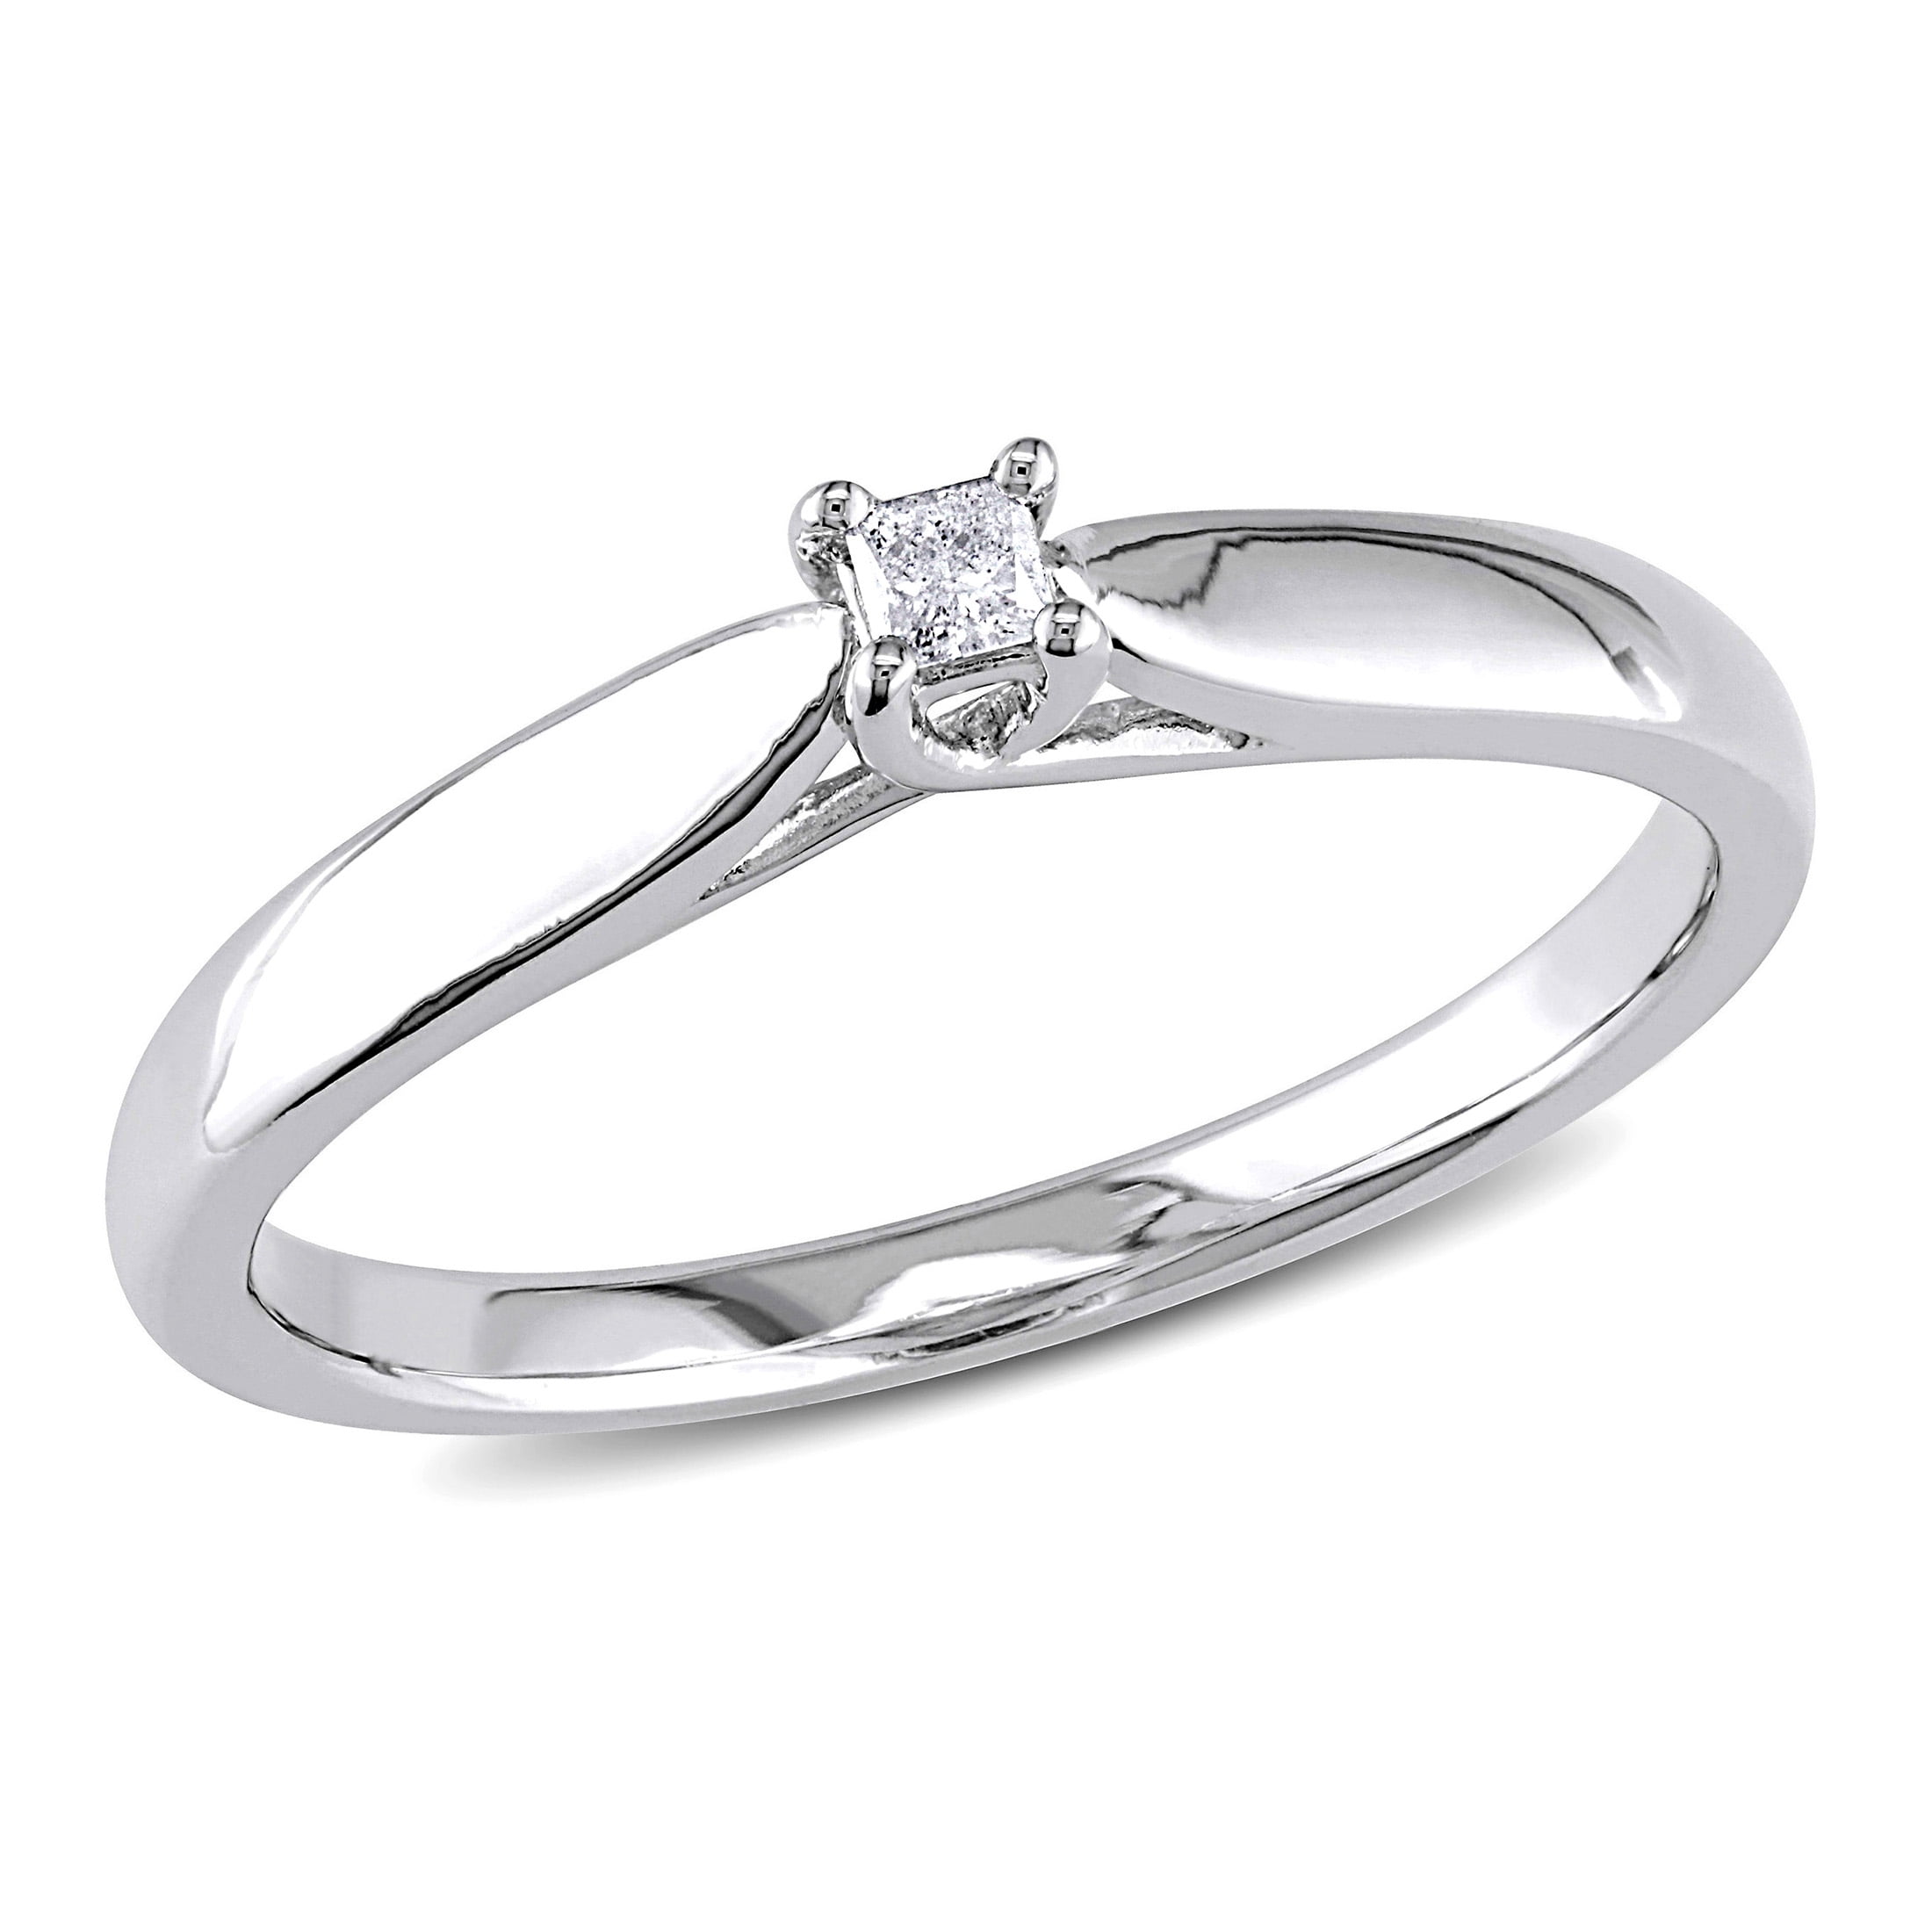 Sterling Silver Diamond Engagement Ring 1/8 in. 3.5mm wide Size 5 w/ 0.05 Carat Brilliant Cut Diamonds